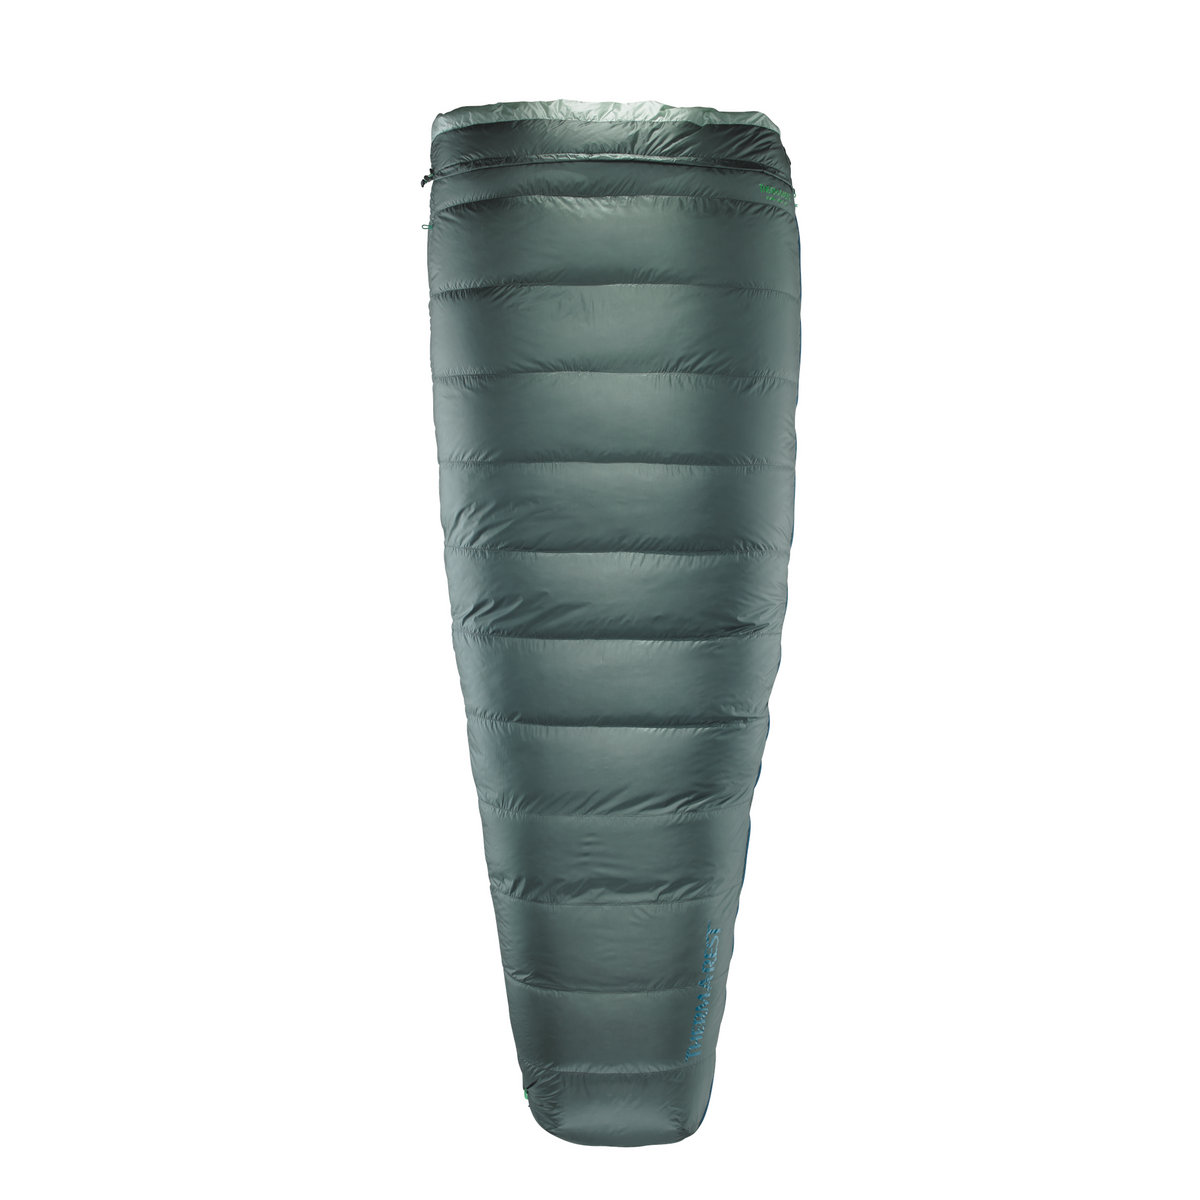 Thermarest Ohm 20F/-6C sleeping bag in Balsam colour, regular length